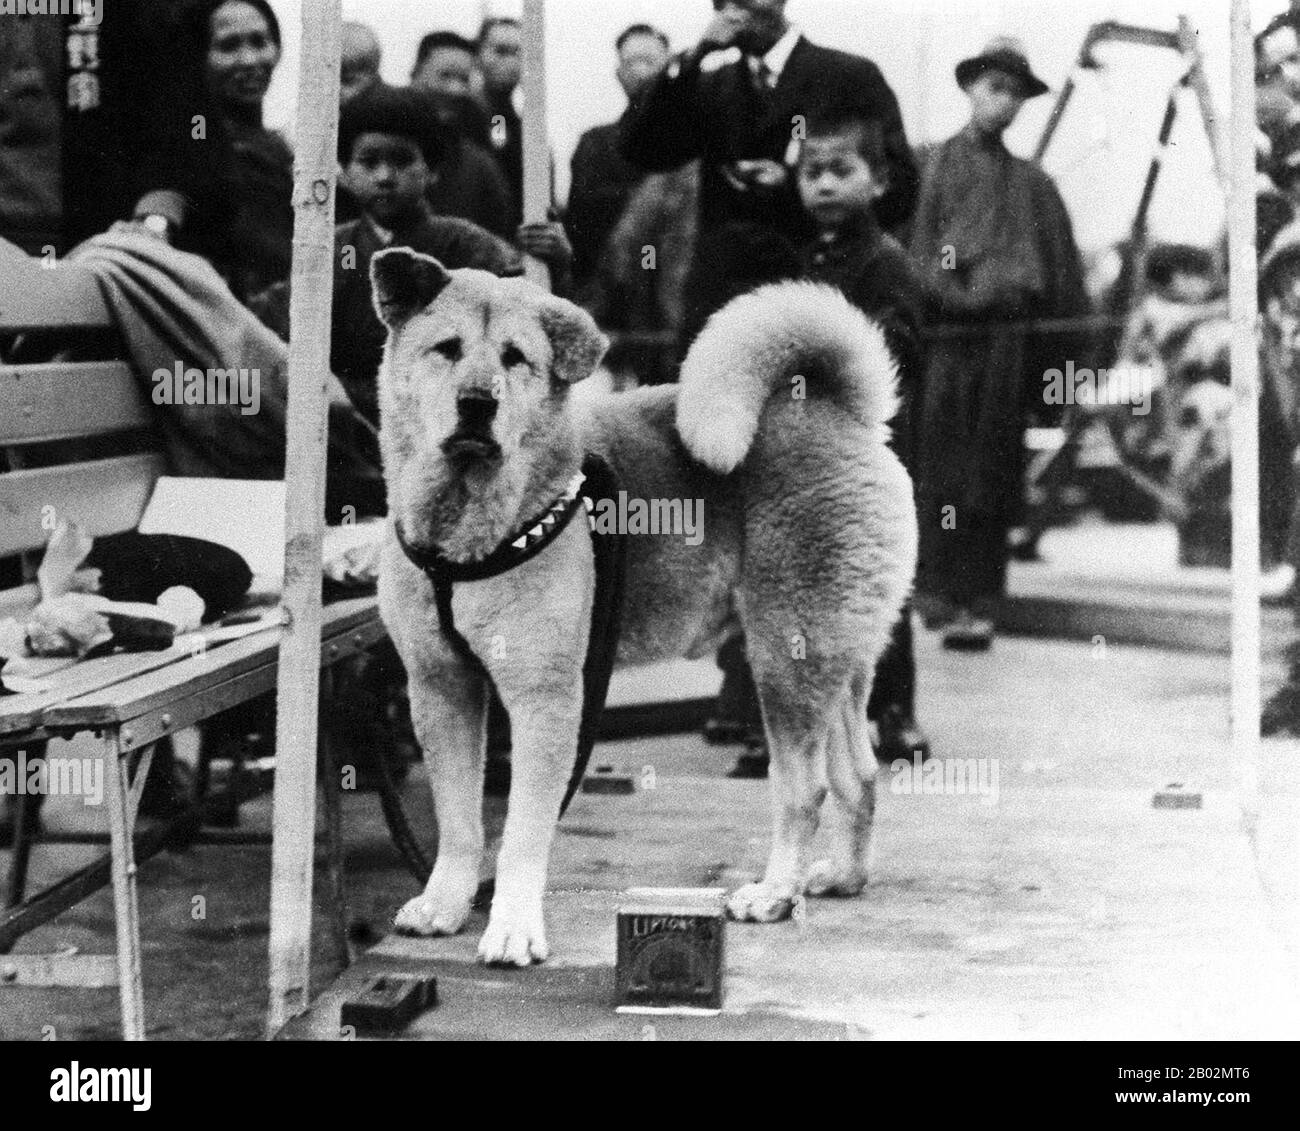 Hachikō (ハチ公, November 10, 1923 – March 8, 1935) was an Akita dog born on a farm near the city of Ōdate, Akita Prefecture, who is remembered for his remarkable loyalty to his owner which continued for many years after his owner's death.  In 1924, Hidesaburō Ueno, a professor in the agriculture department at the University of Tokyo, took in Hachikō, a golden brown Akita, as a pet. During his owner's life, Hachikō greeted him at the end of each day at the nearby Shibuya Station. The pair continued their daily routine until May 1925, when Professor Ueno did not return. The professor had suffered Stock Photo